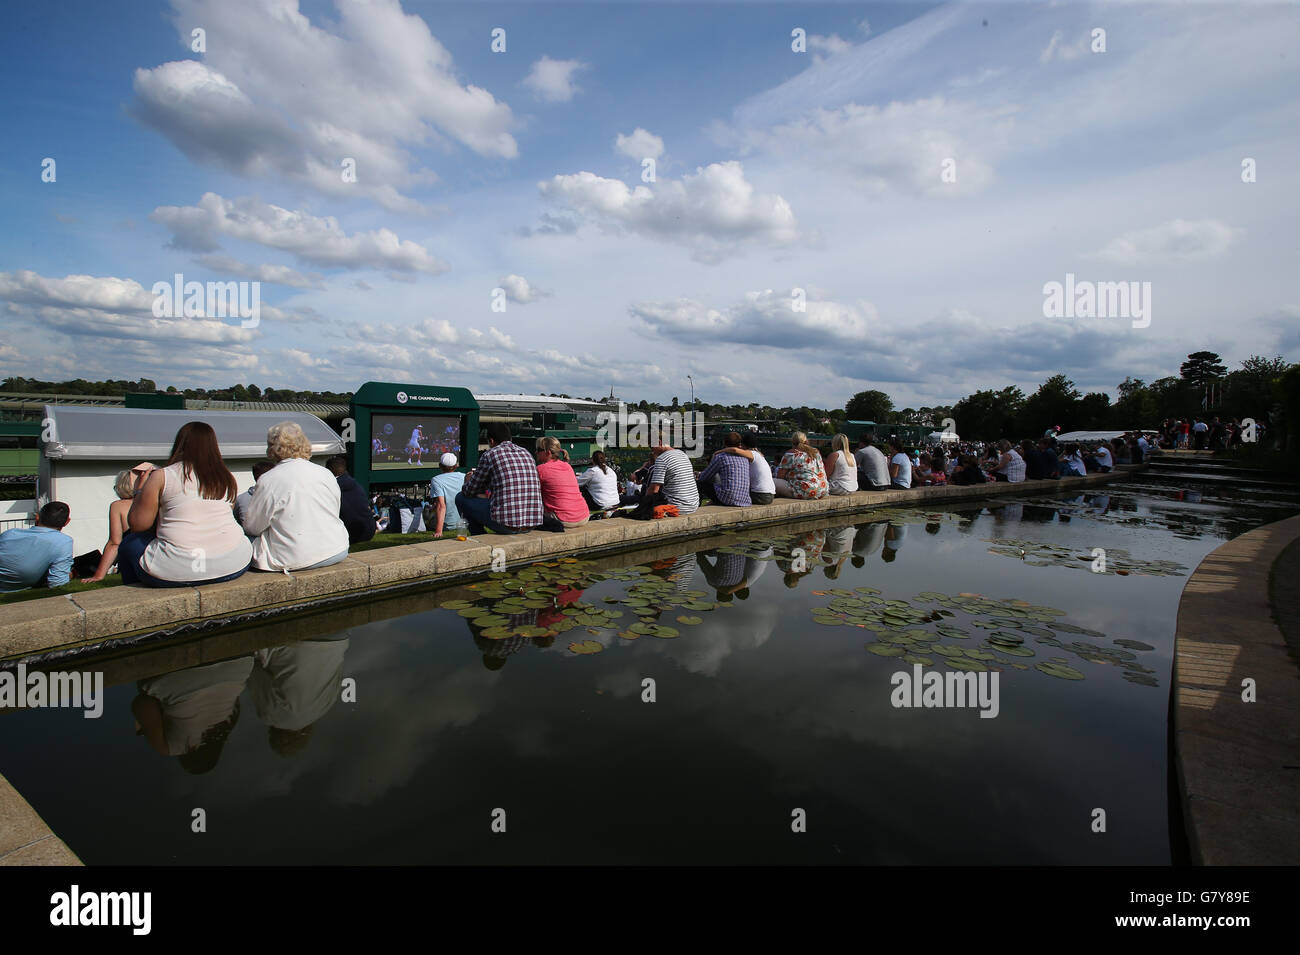 London, UK. 27th June, 2016. Spectators watch a giant screen as they sit on Murray Mount (Henman Hill) on Day 1 at the 2016 Wimbledon Tennis Championships in London June 27, 2016. © Han Yan/Xinhua/Alamy Live News Stock Photo